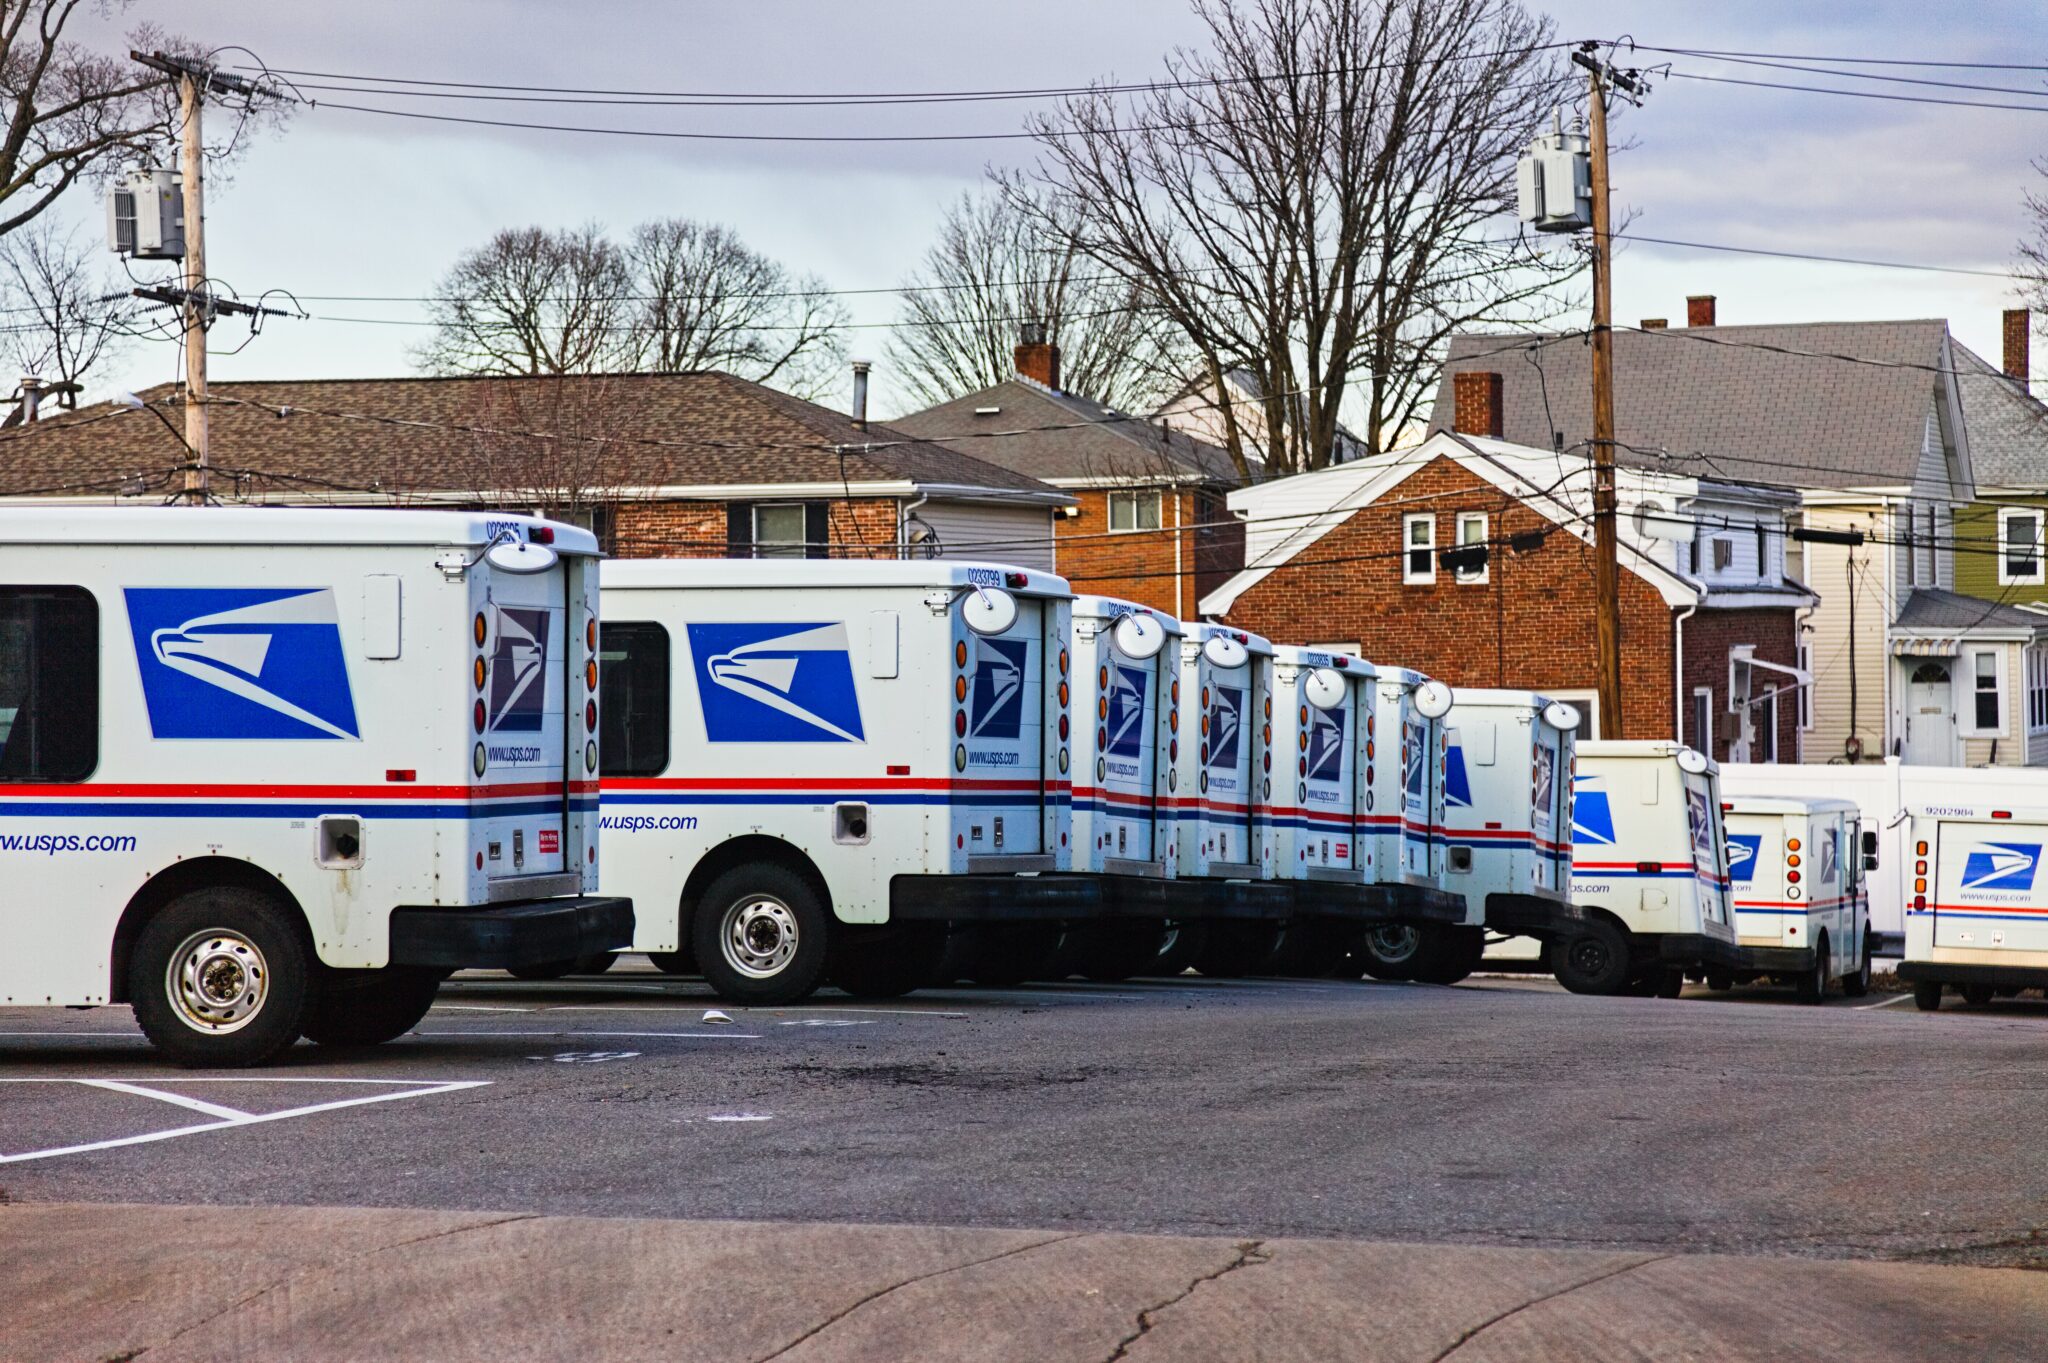 USPS sued by states for purchasing gas vehicles, allegedly violating environmental law